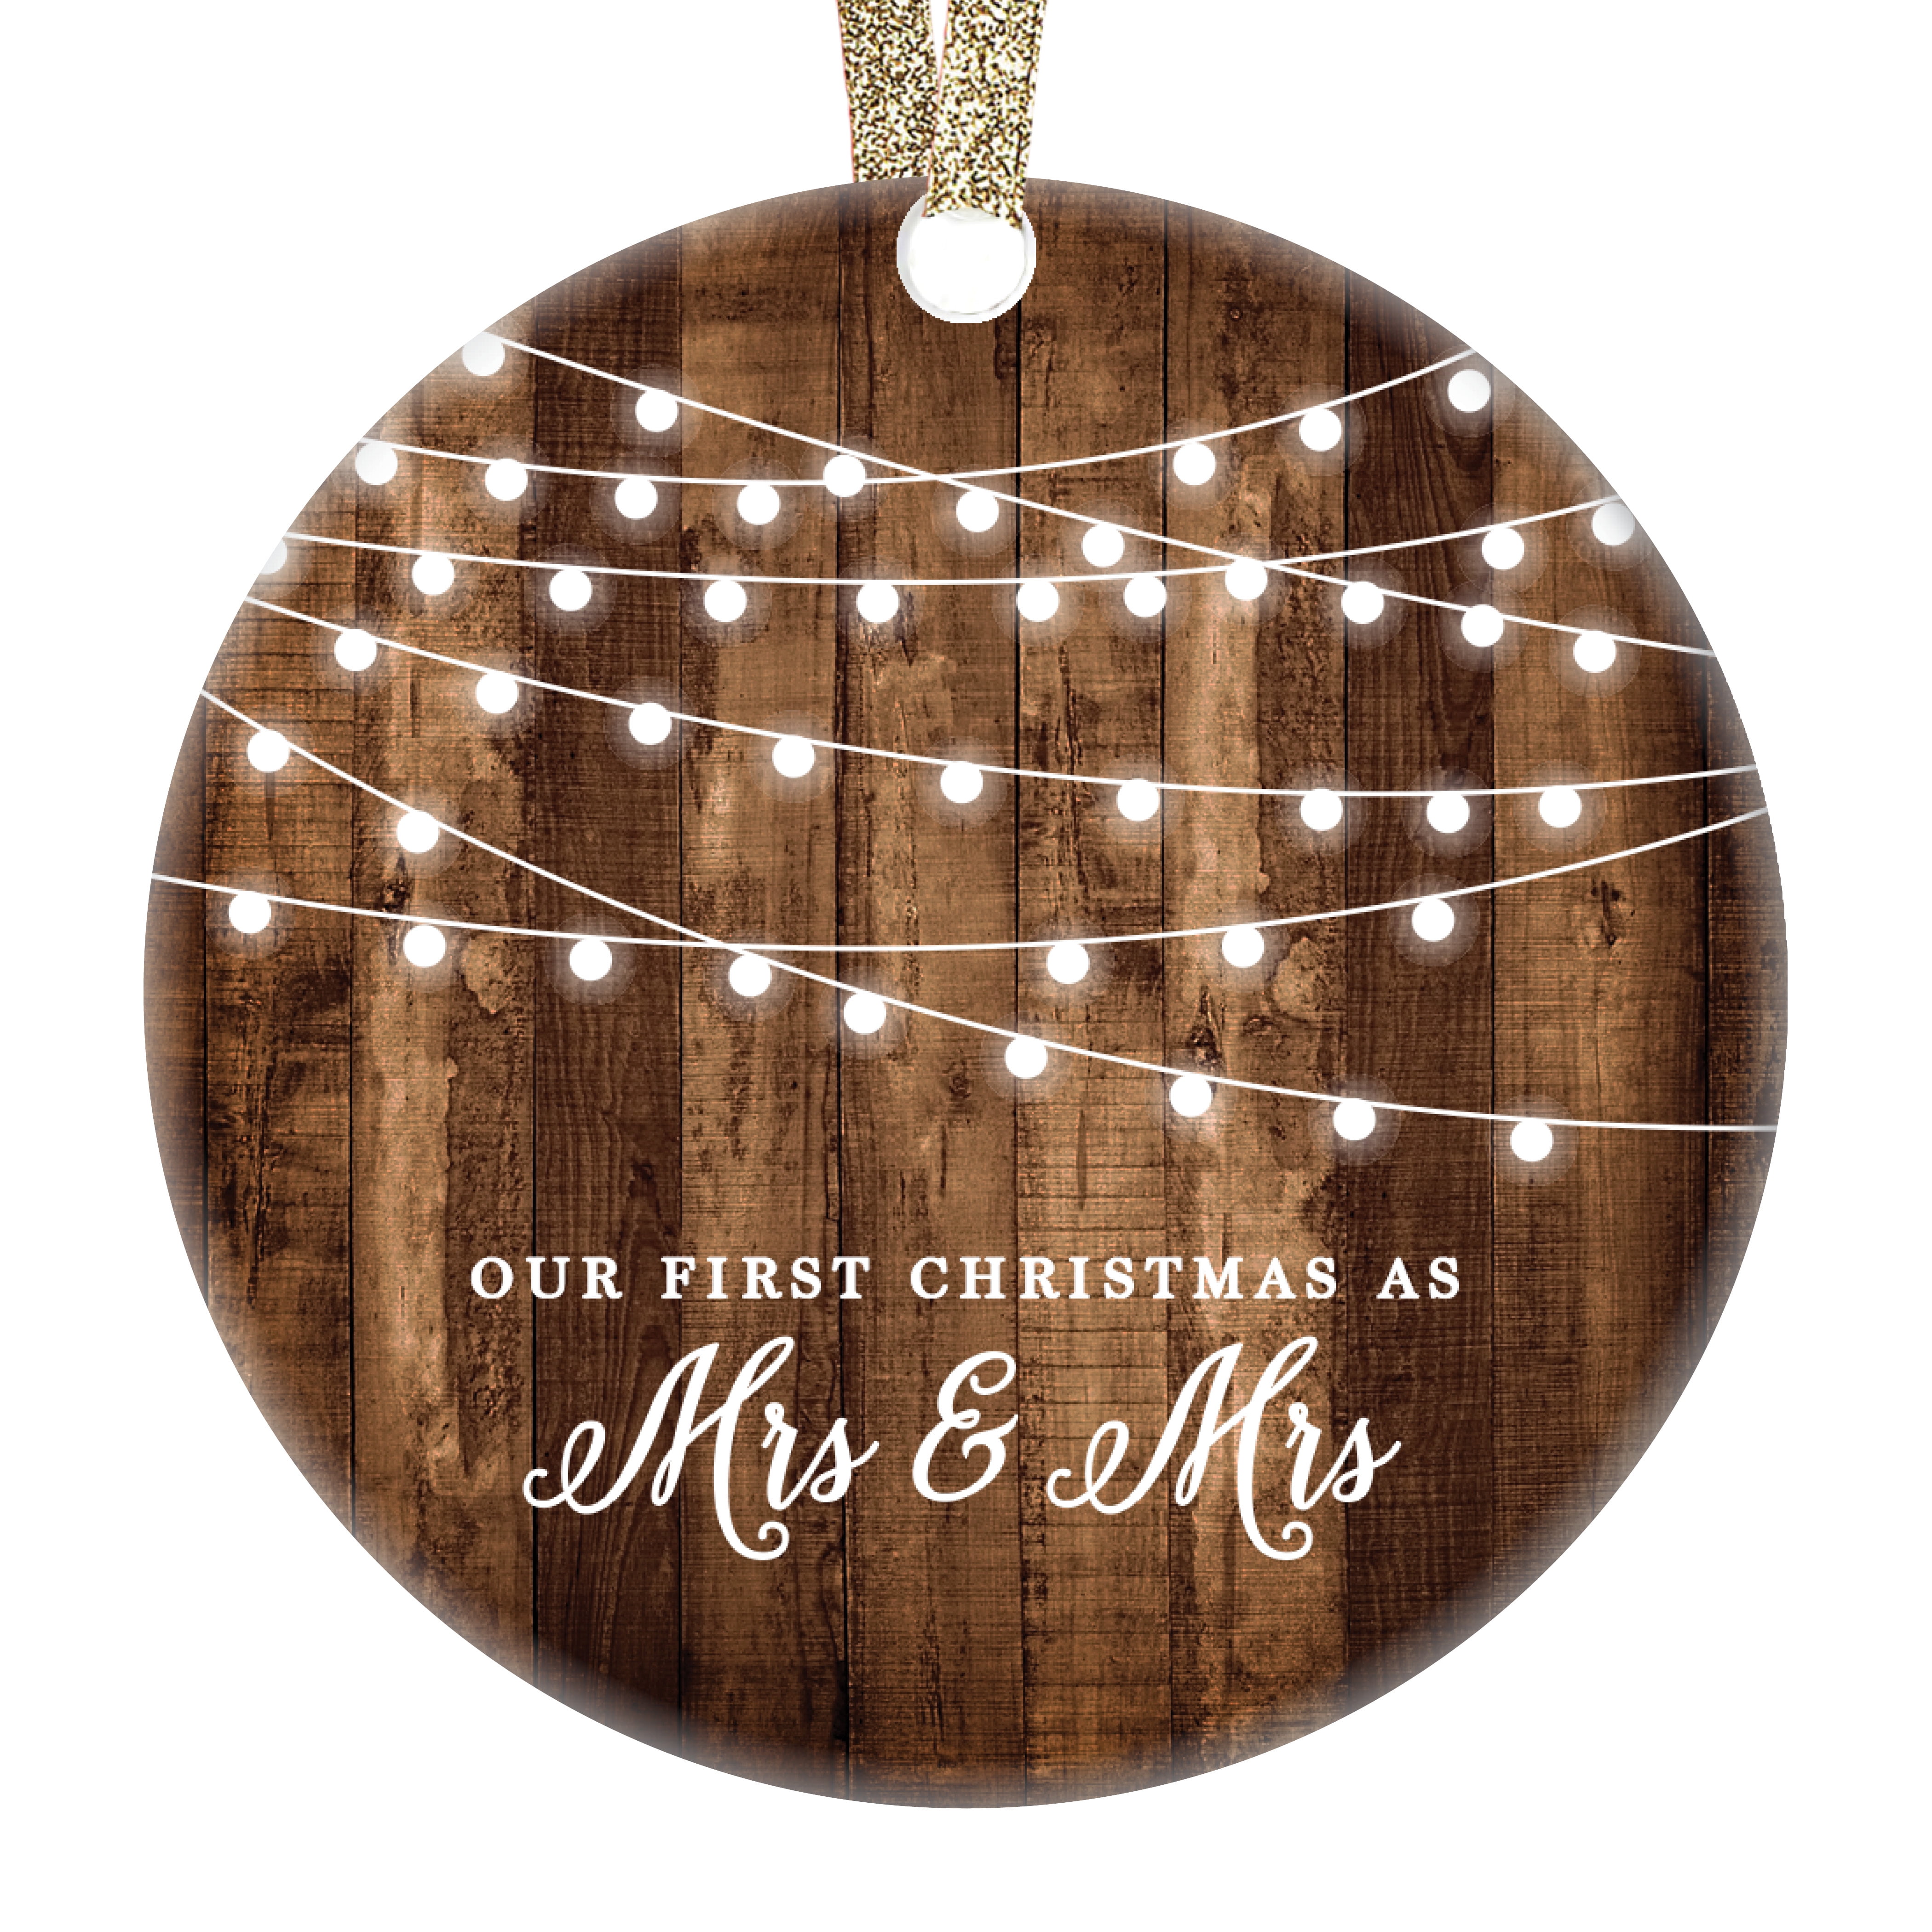 Married Lesbian Couple Christmas Ornament First Christmas as Mrs and Mrs New Wives Ceramic Same Sex Newlywed Gay Pride Rustic Farmhouse Collectible 3/